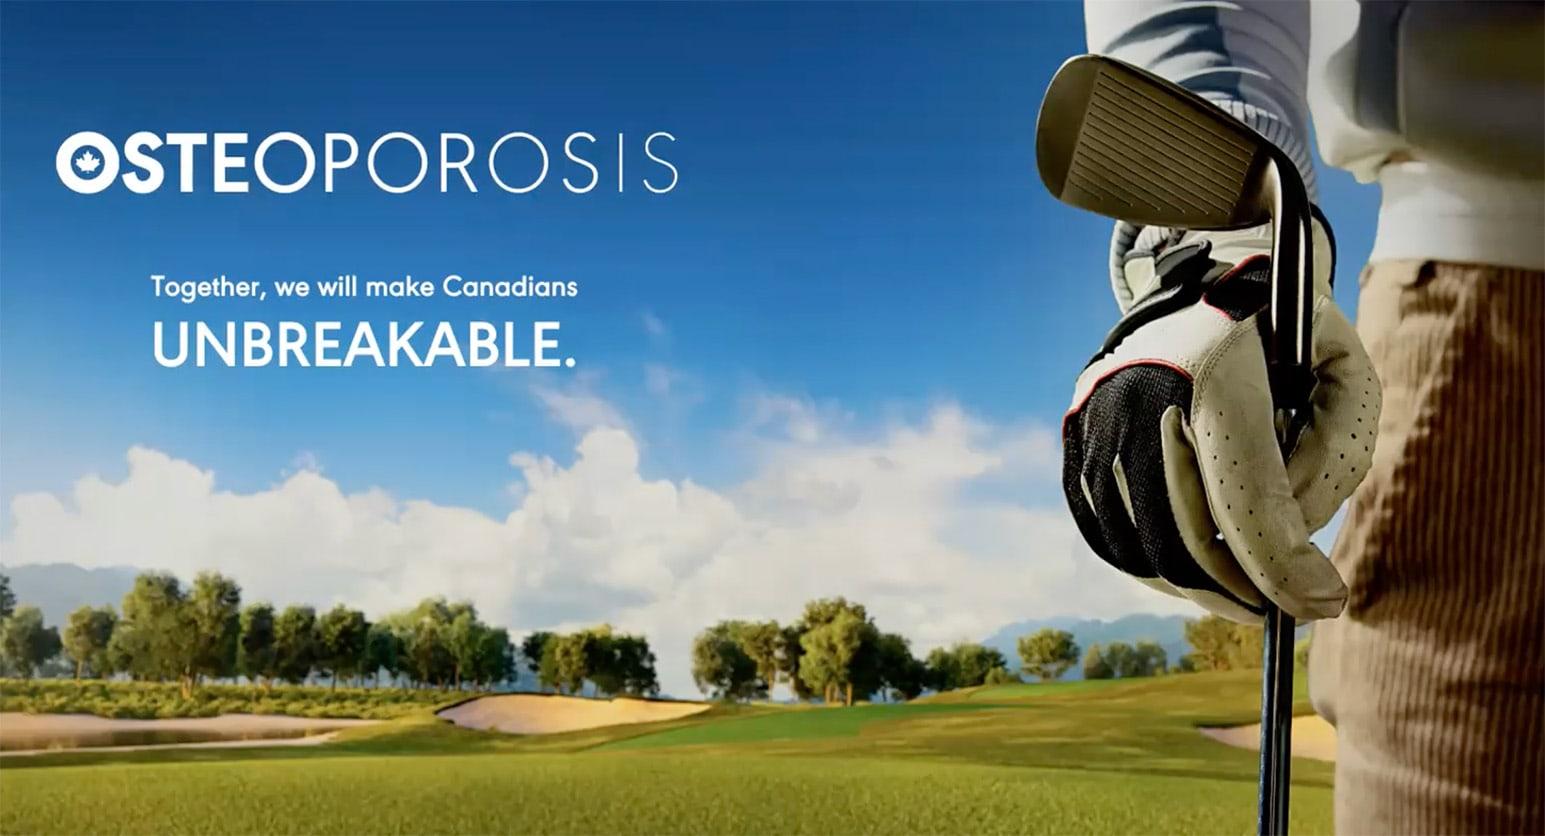 Fore! Golfing with Osteoporosis